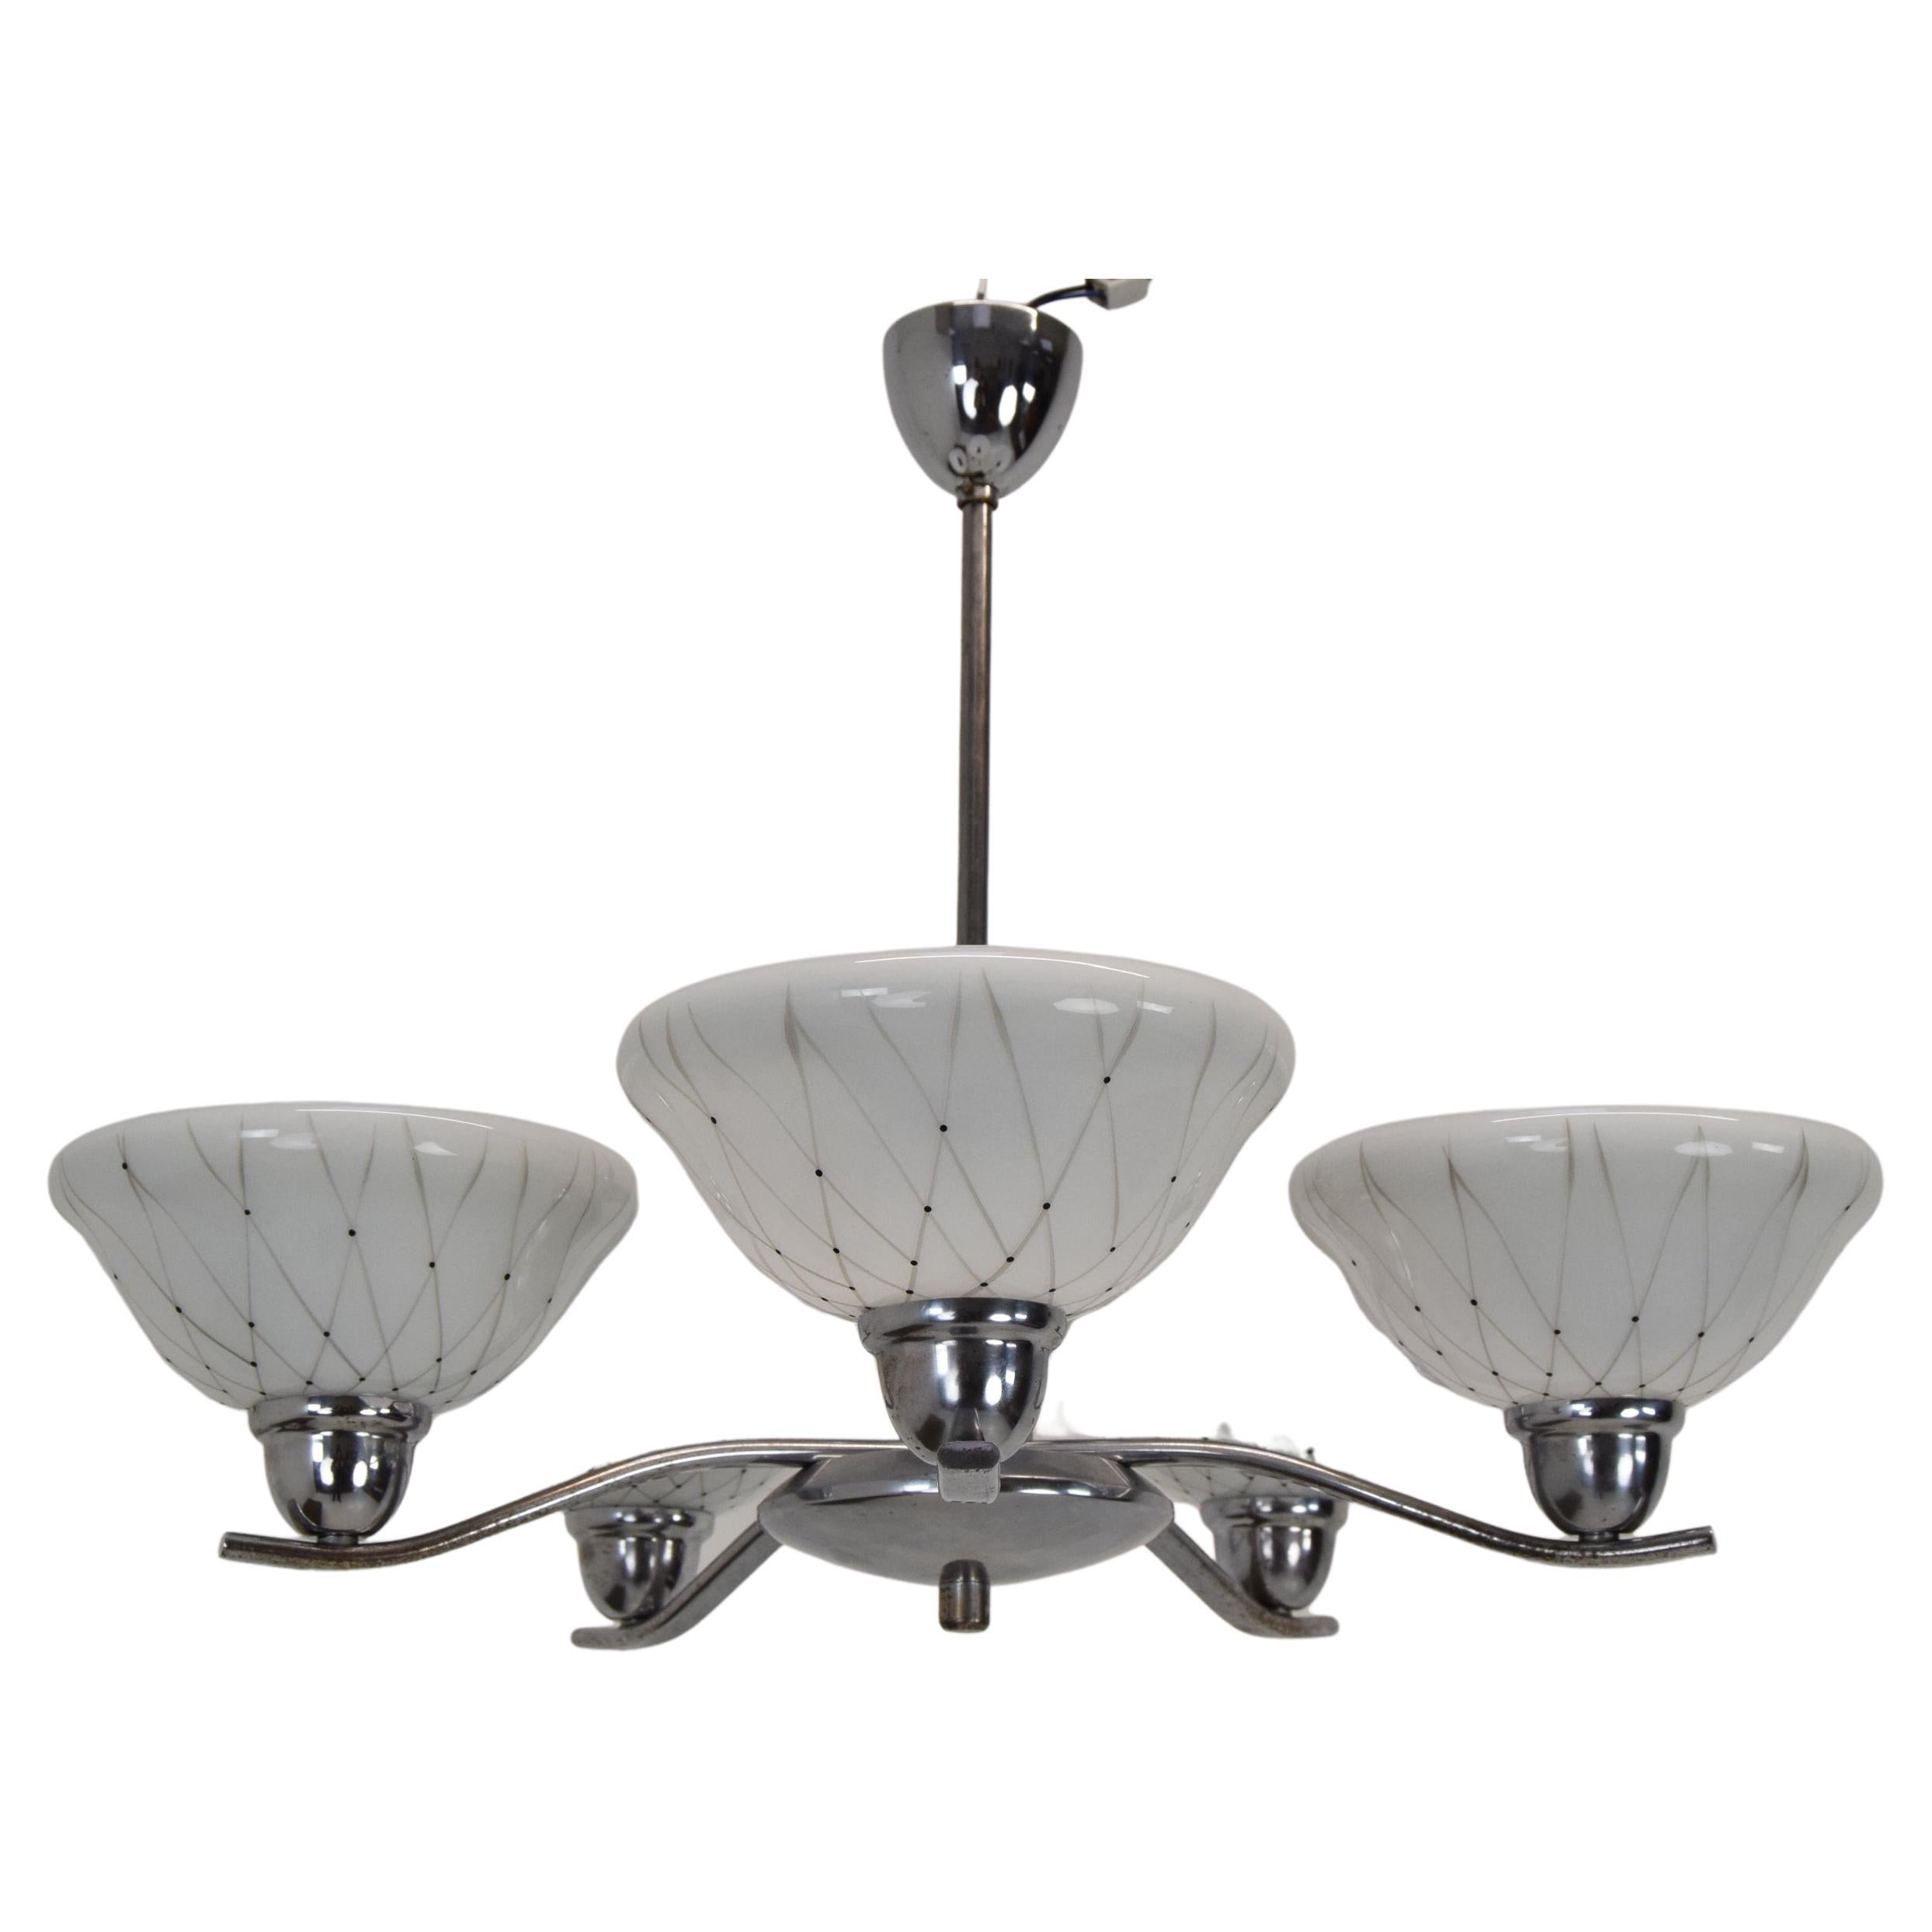 Mid-Century Chandelier by Company Drukov, 1960's For Sale